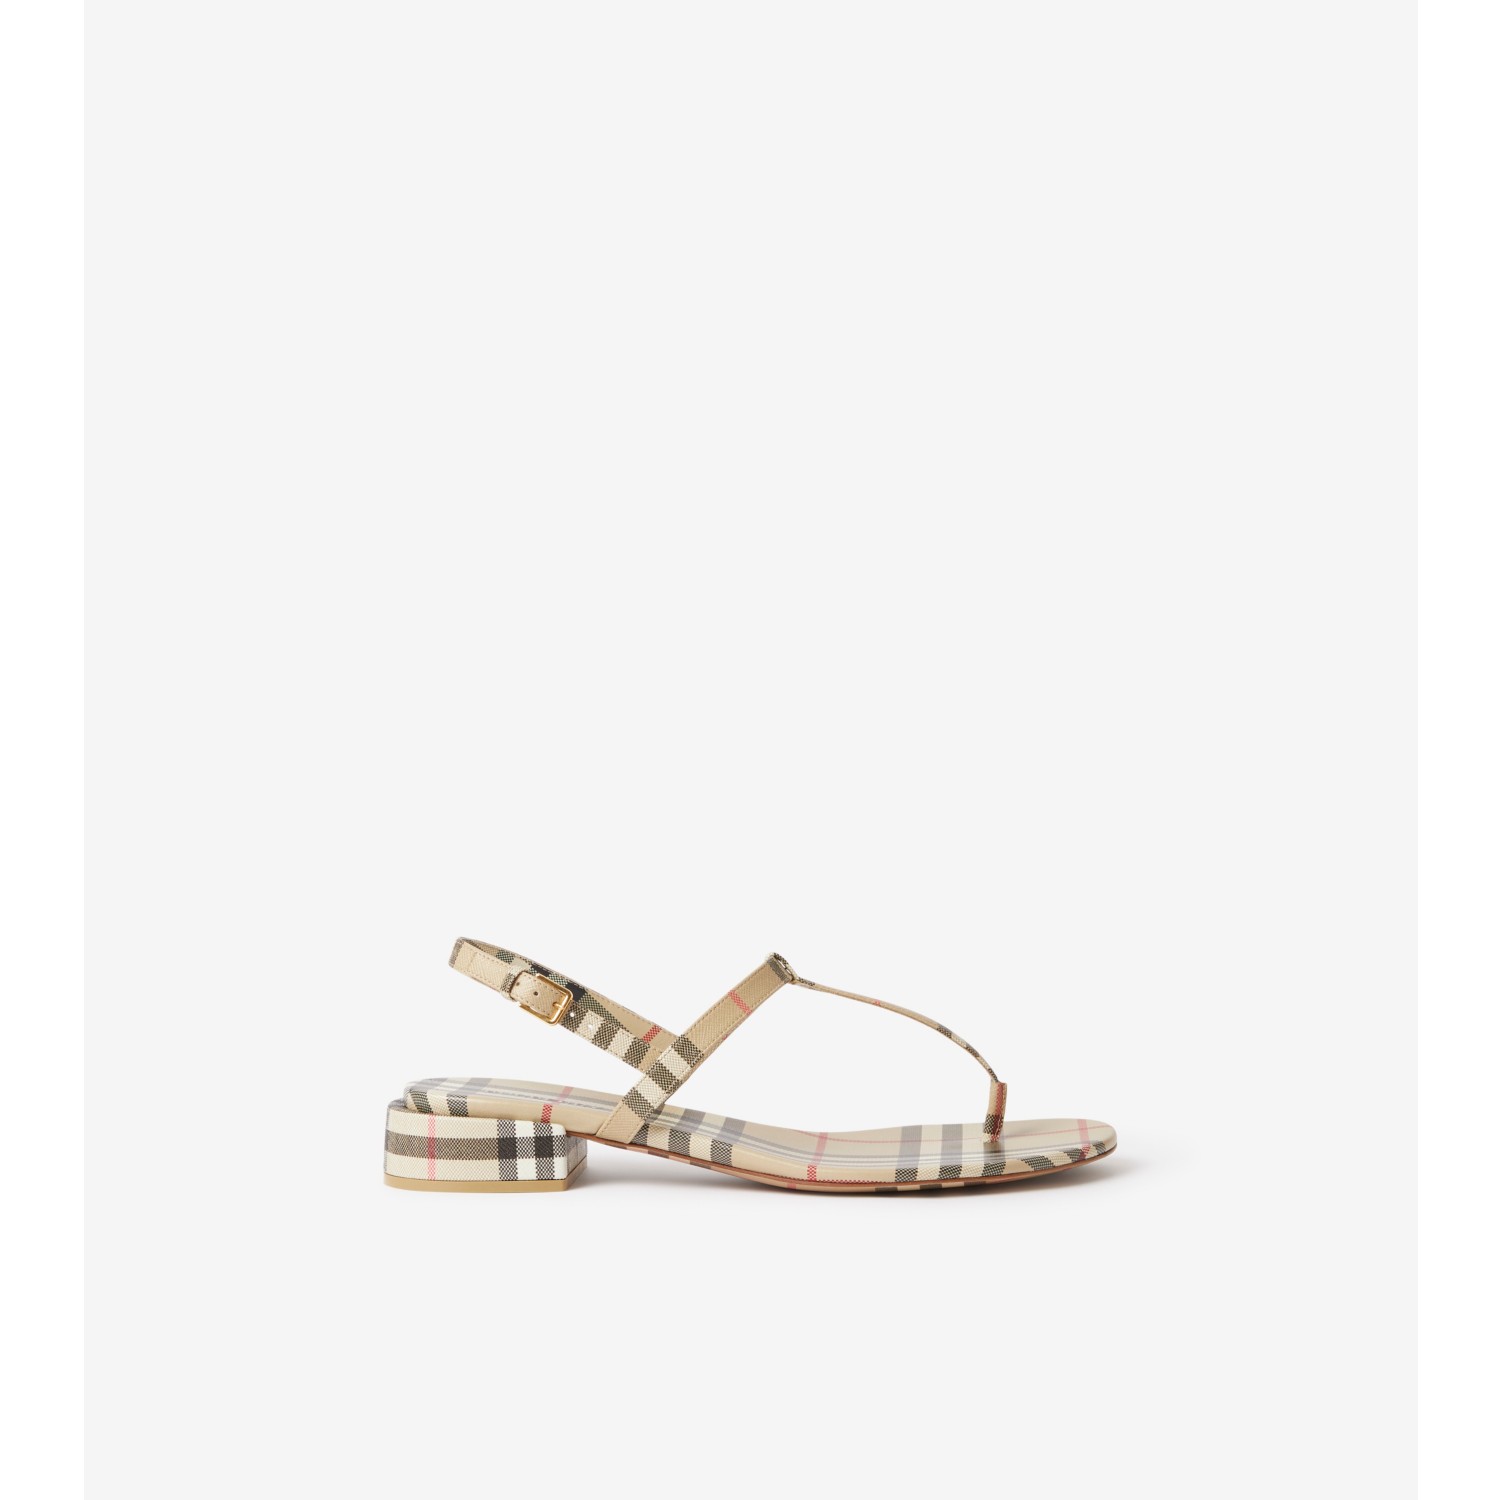 Check and Leather Sandals in Archive Beige - Women